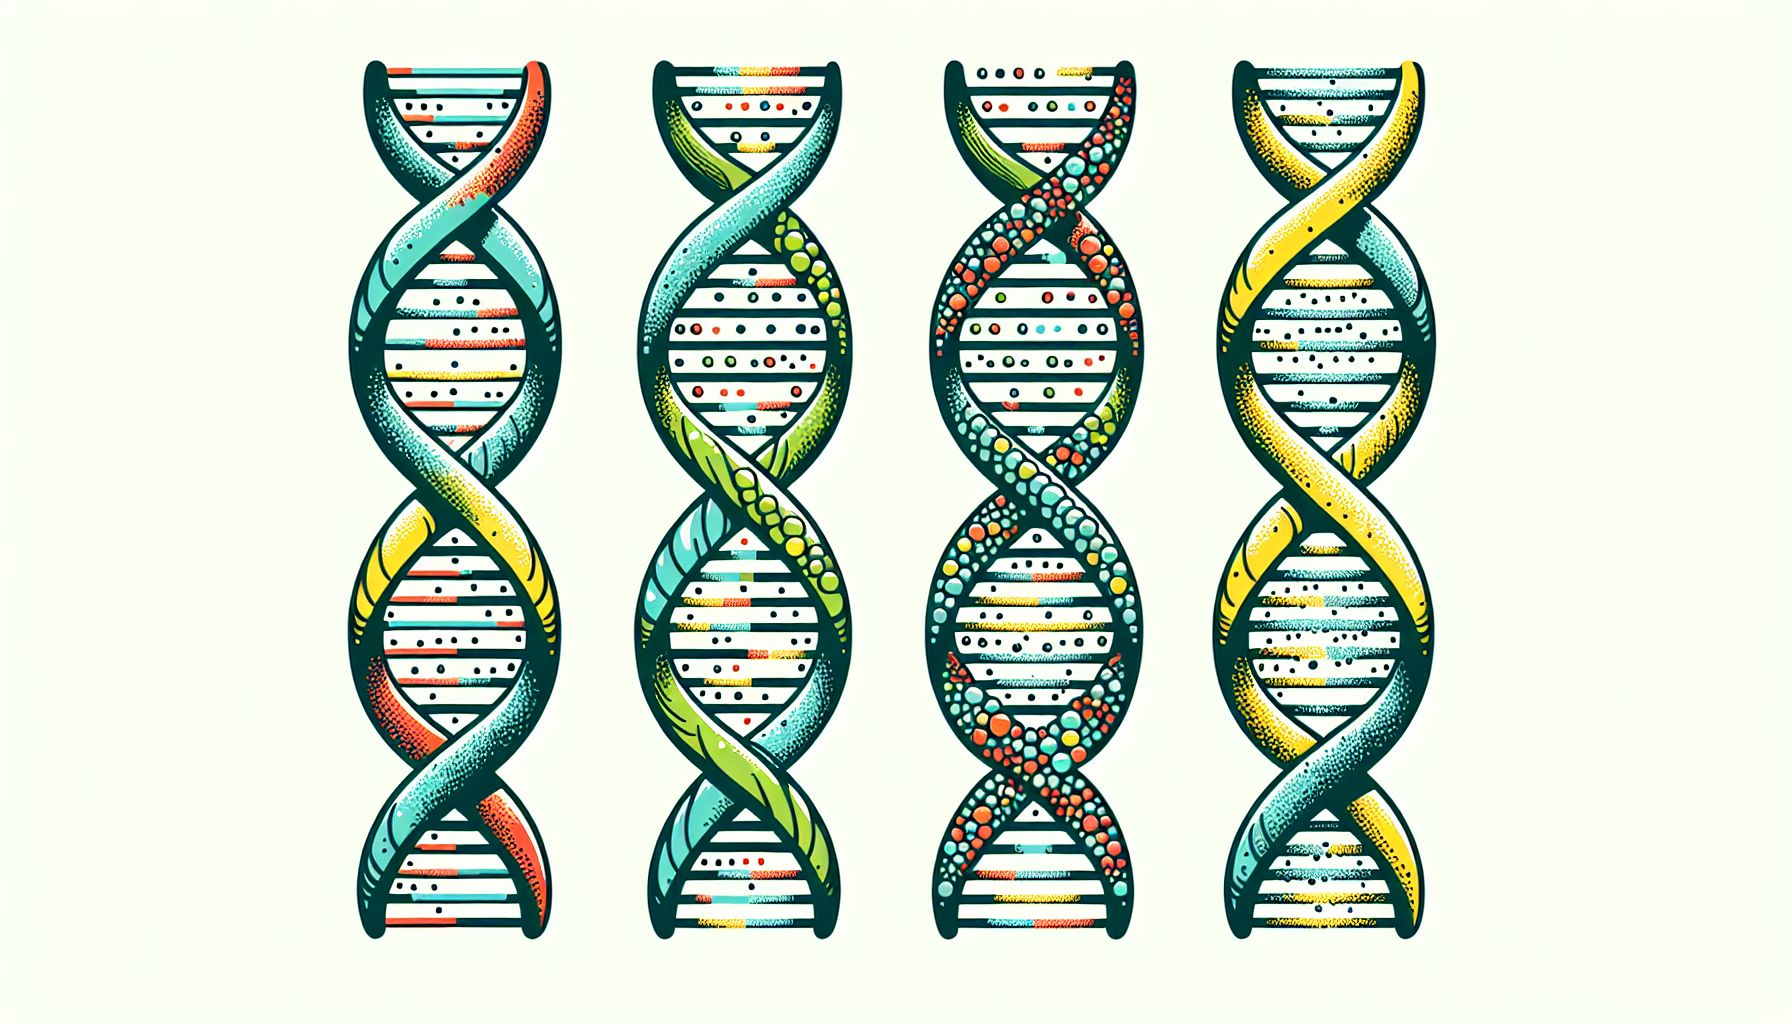 DNA in flat illustration style and white background, red #f47574, green #88c7a8, yellow #fcc44b, and blue #645bc8 colors.